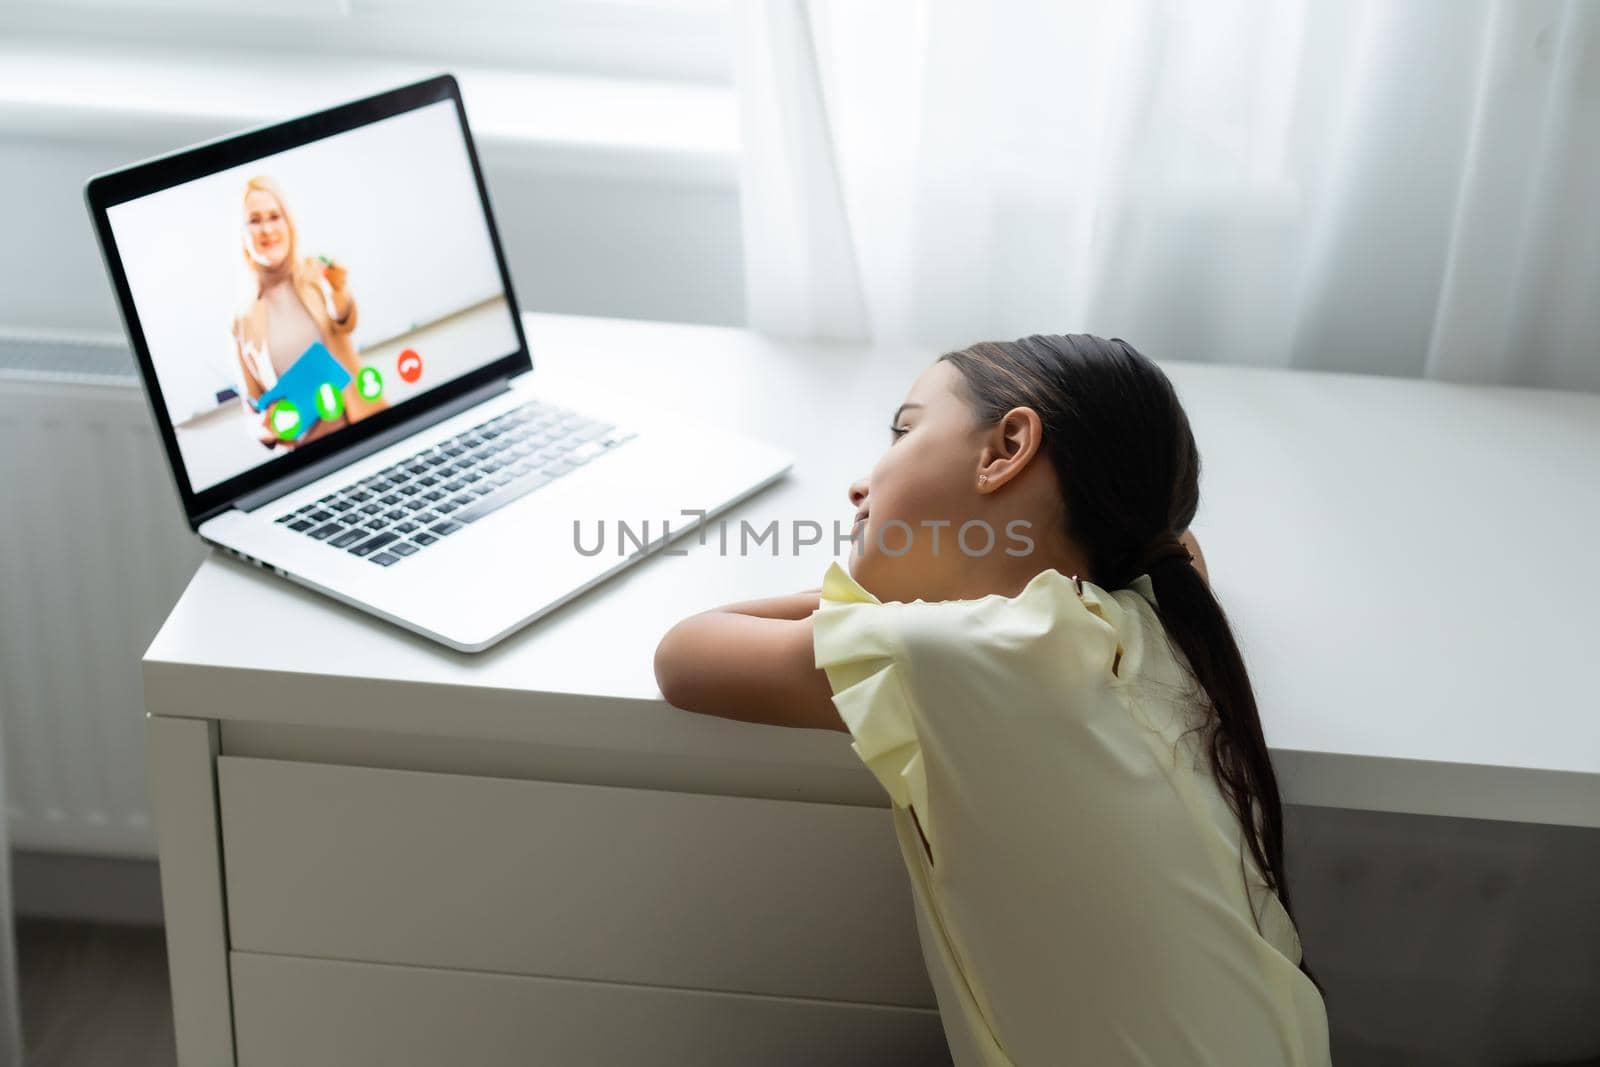 home, leisure, technology and internet concept - little student girl with laptop computer at home, little girl uses video chat